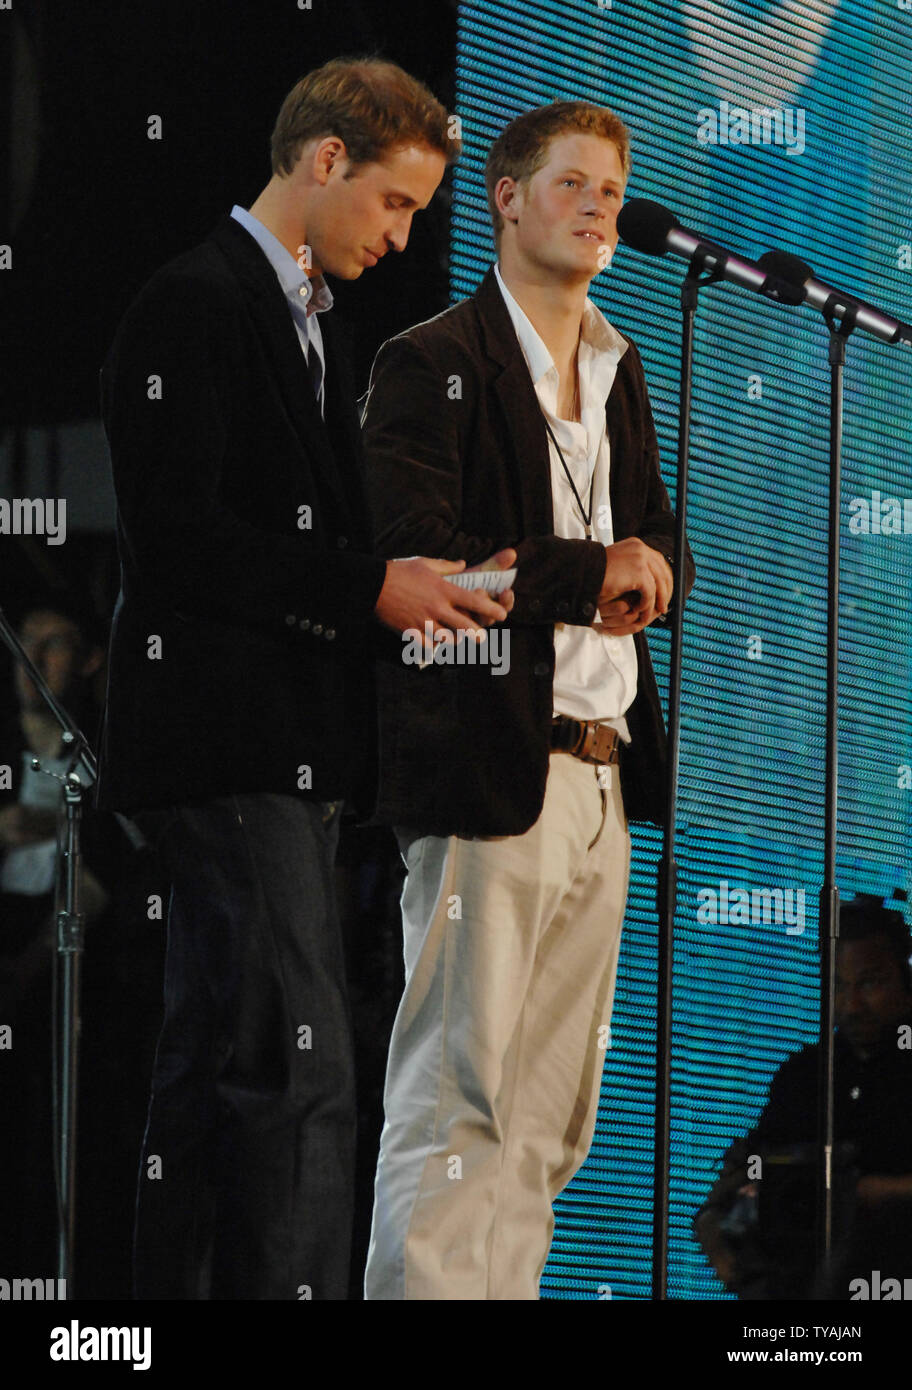 Princess Diana's sons Prince William (L) and Prince Harry attend 'The Concert For Diana' at Wembley Stadium in London on July 1, 2007.  (UPI Photo/Rune Hellestad) Stock Photo